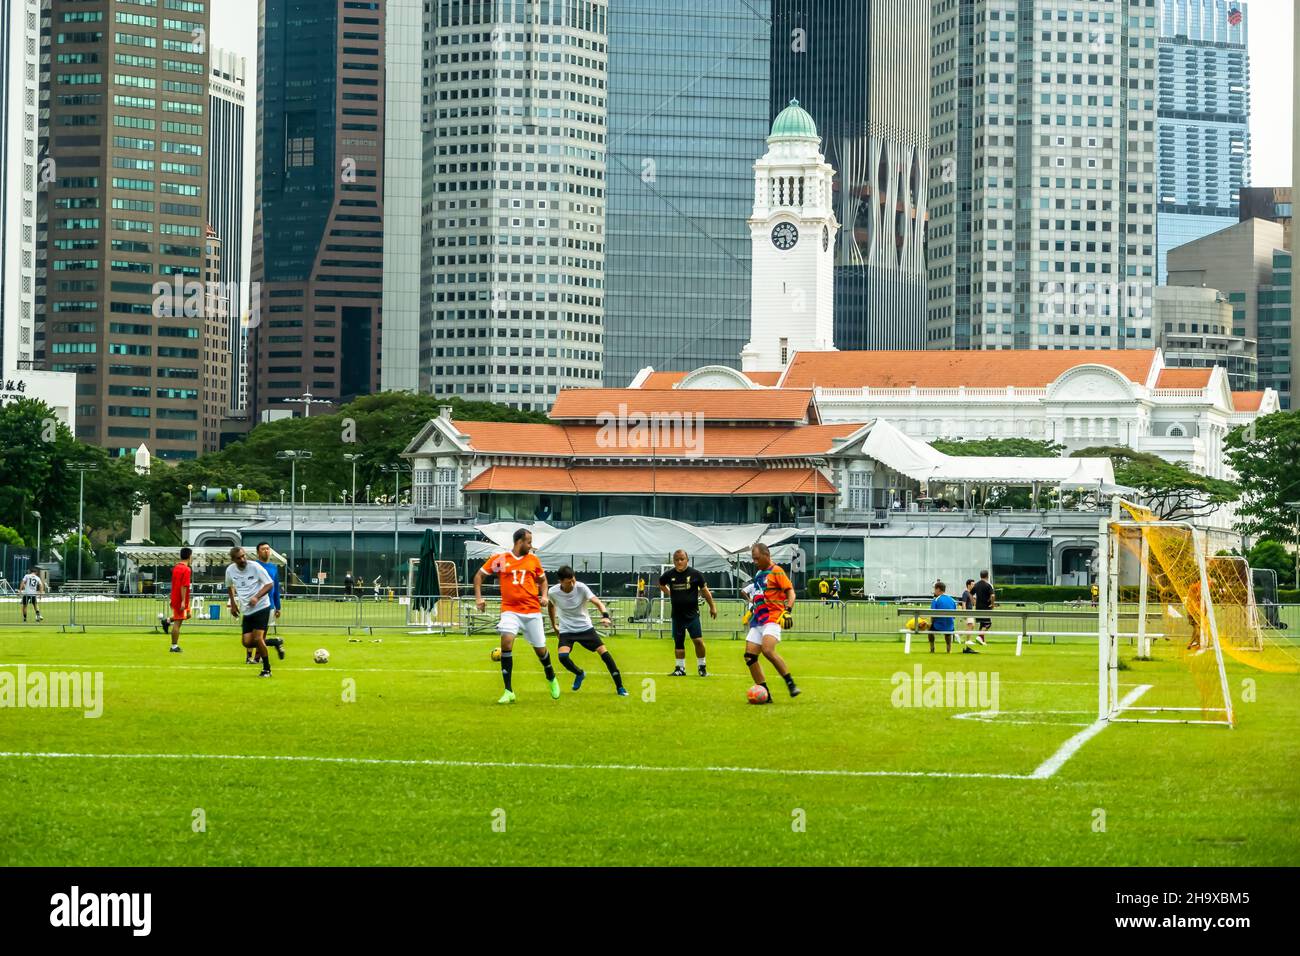 Foot ball activity on Padang field, with Singapore Cricket Club in the background Stock Photo